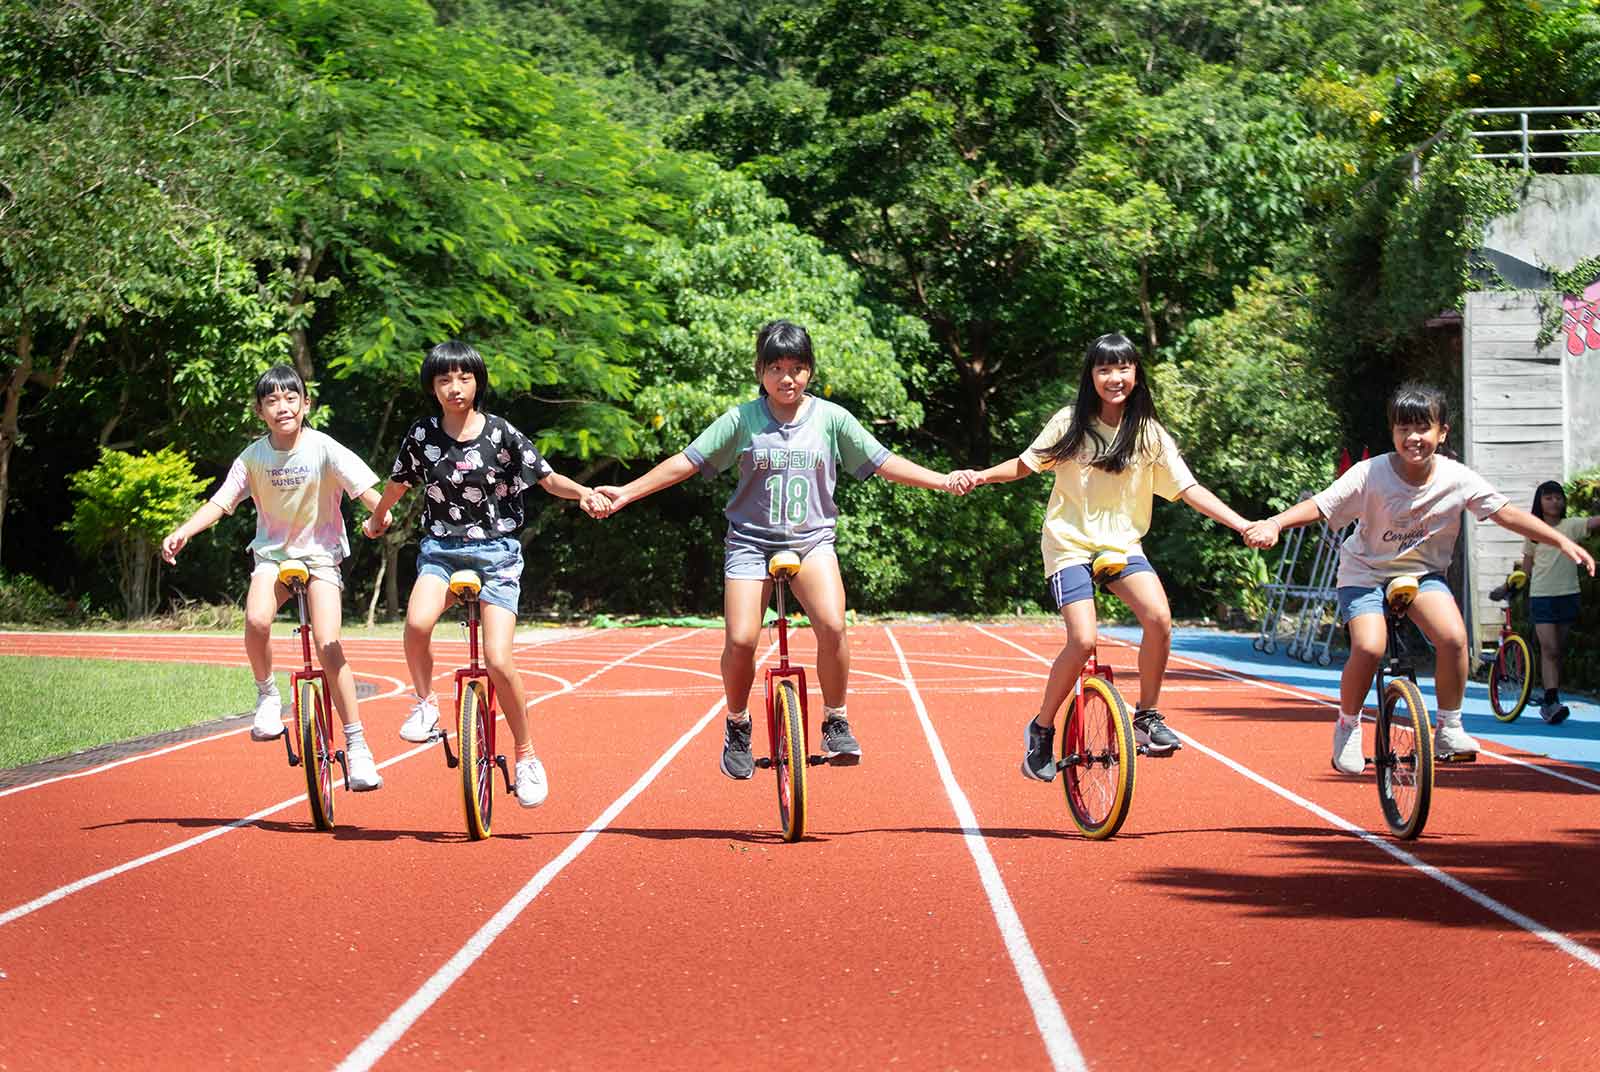 The potential for Taiwan’s small schools